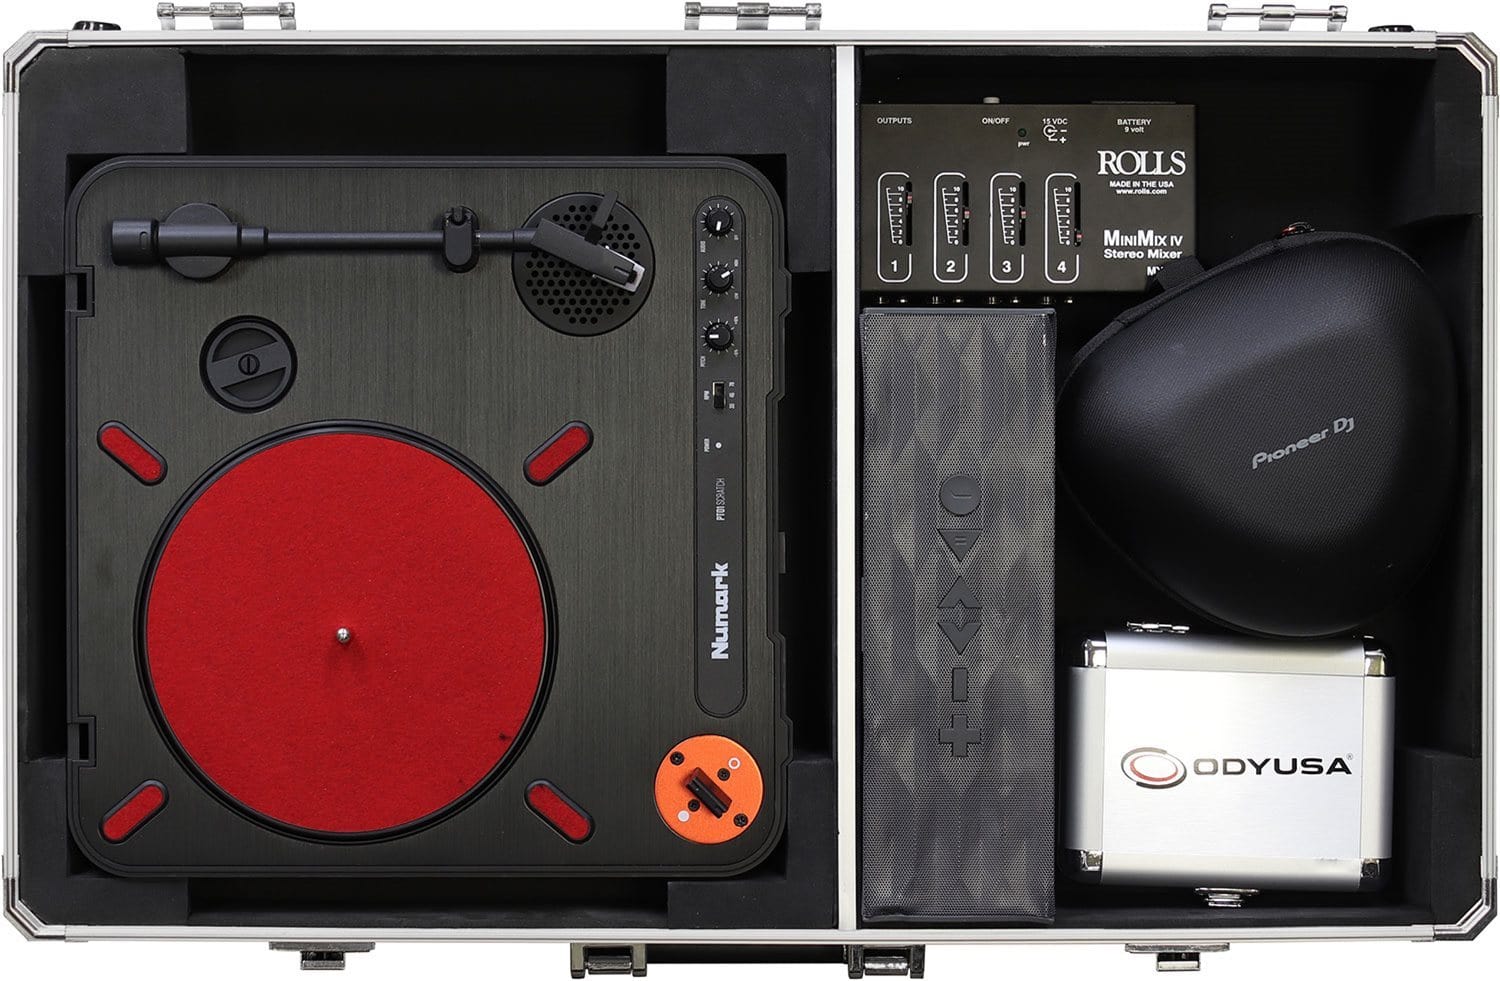 Odyssey KPT01SCSIL Numark PT01 Silver Turntable Case with Side Compartment - PSSL ProSound and Stage Lighting